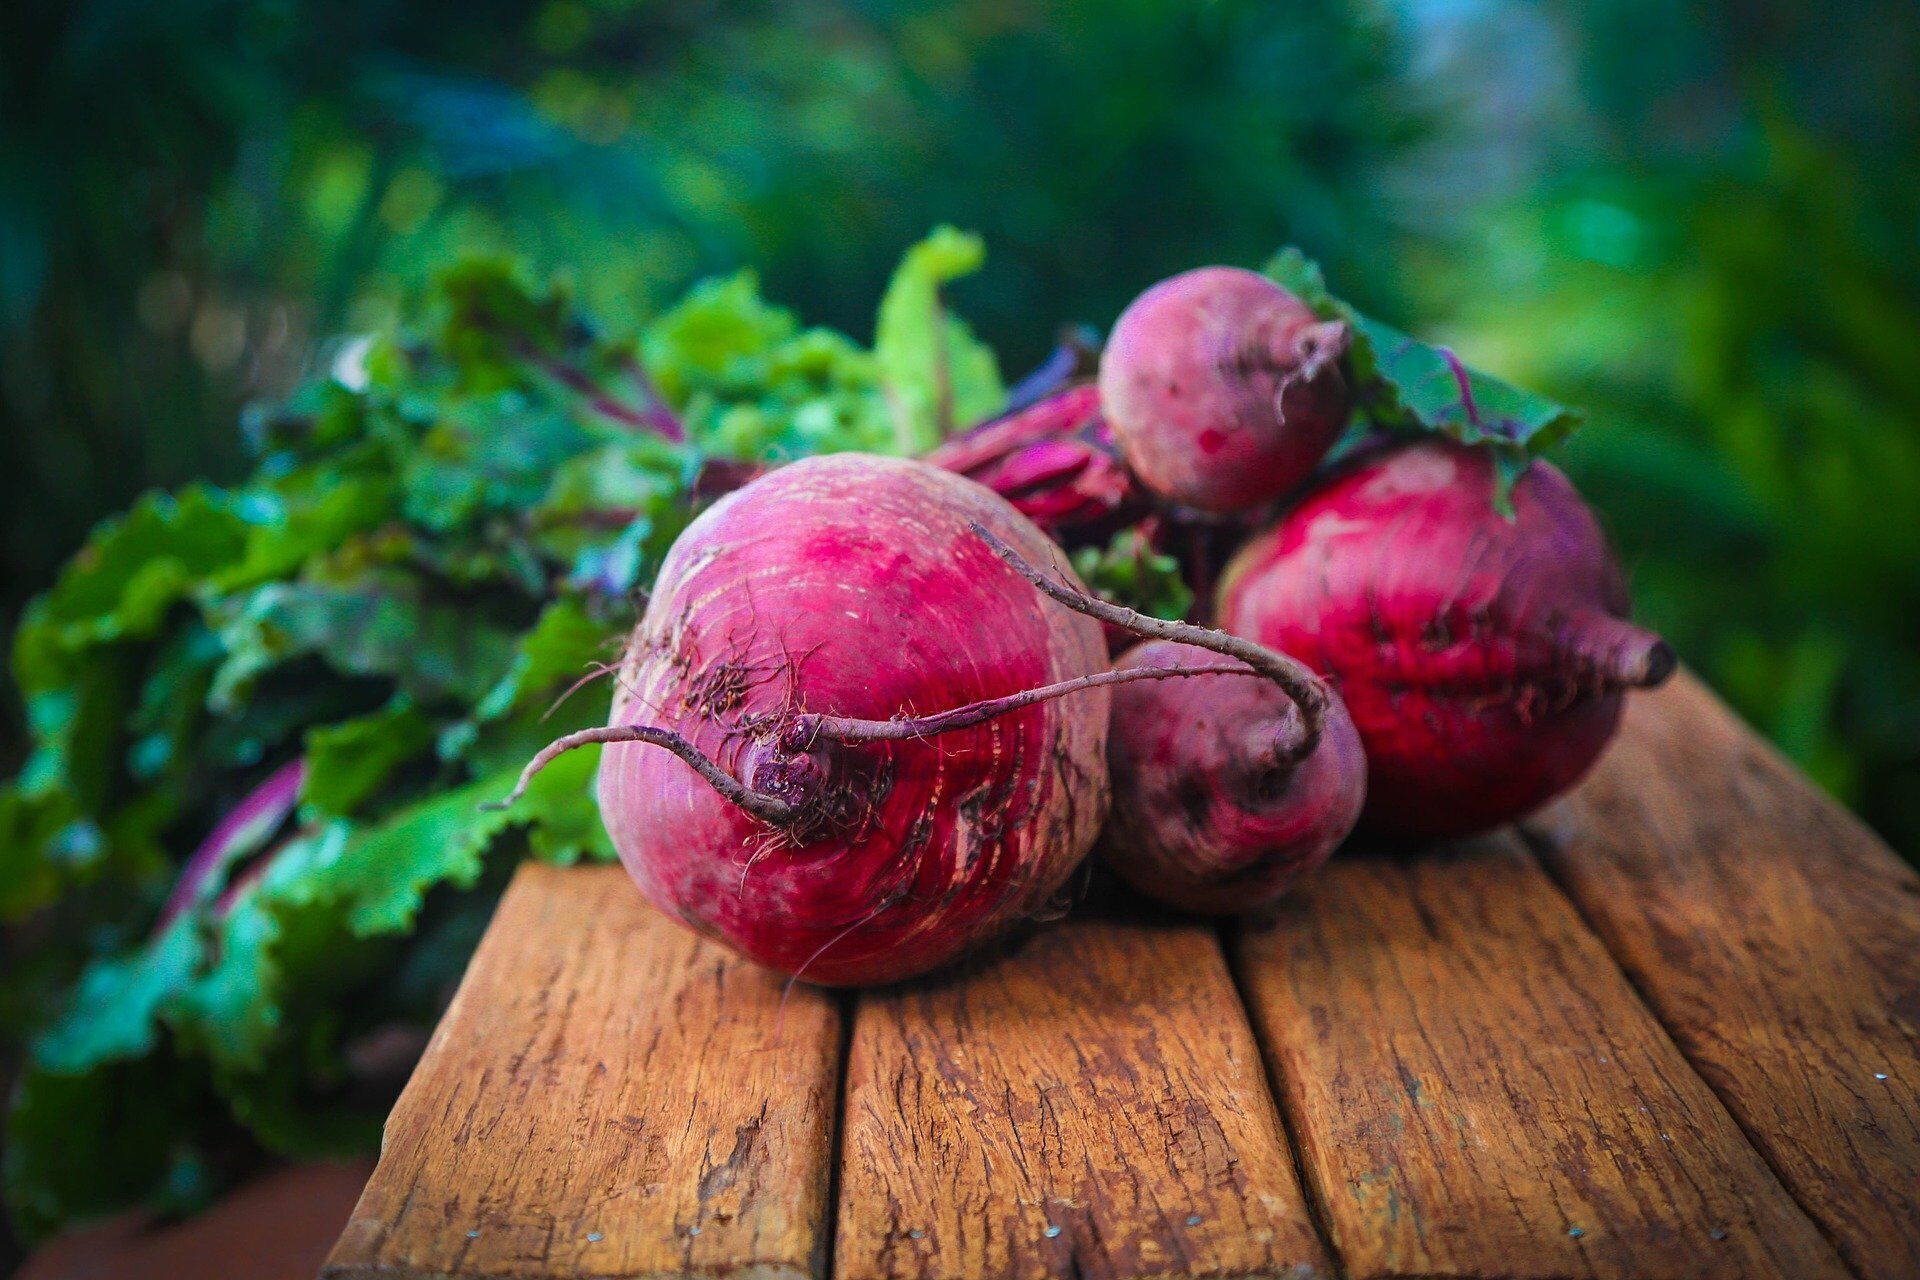 What to cook with healthy beets